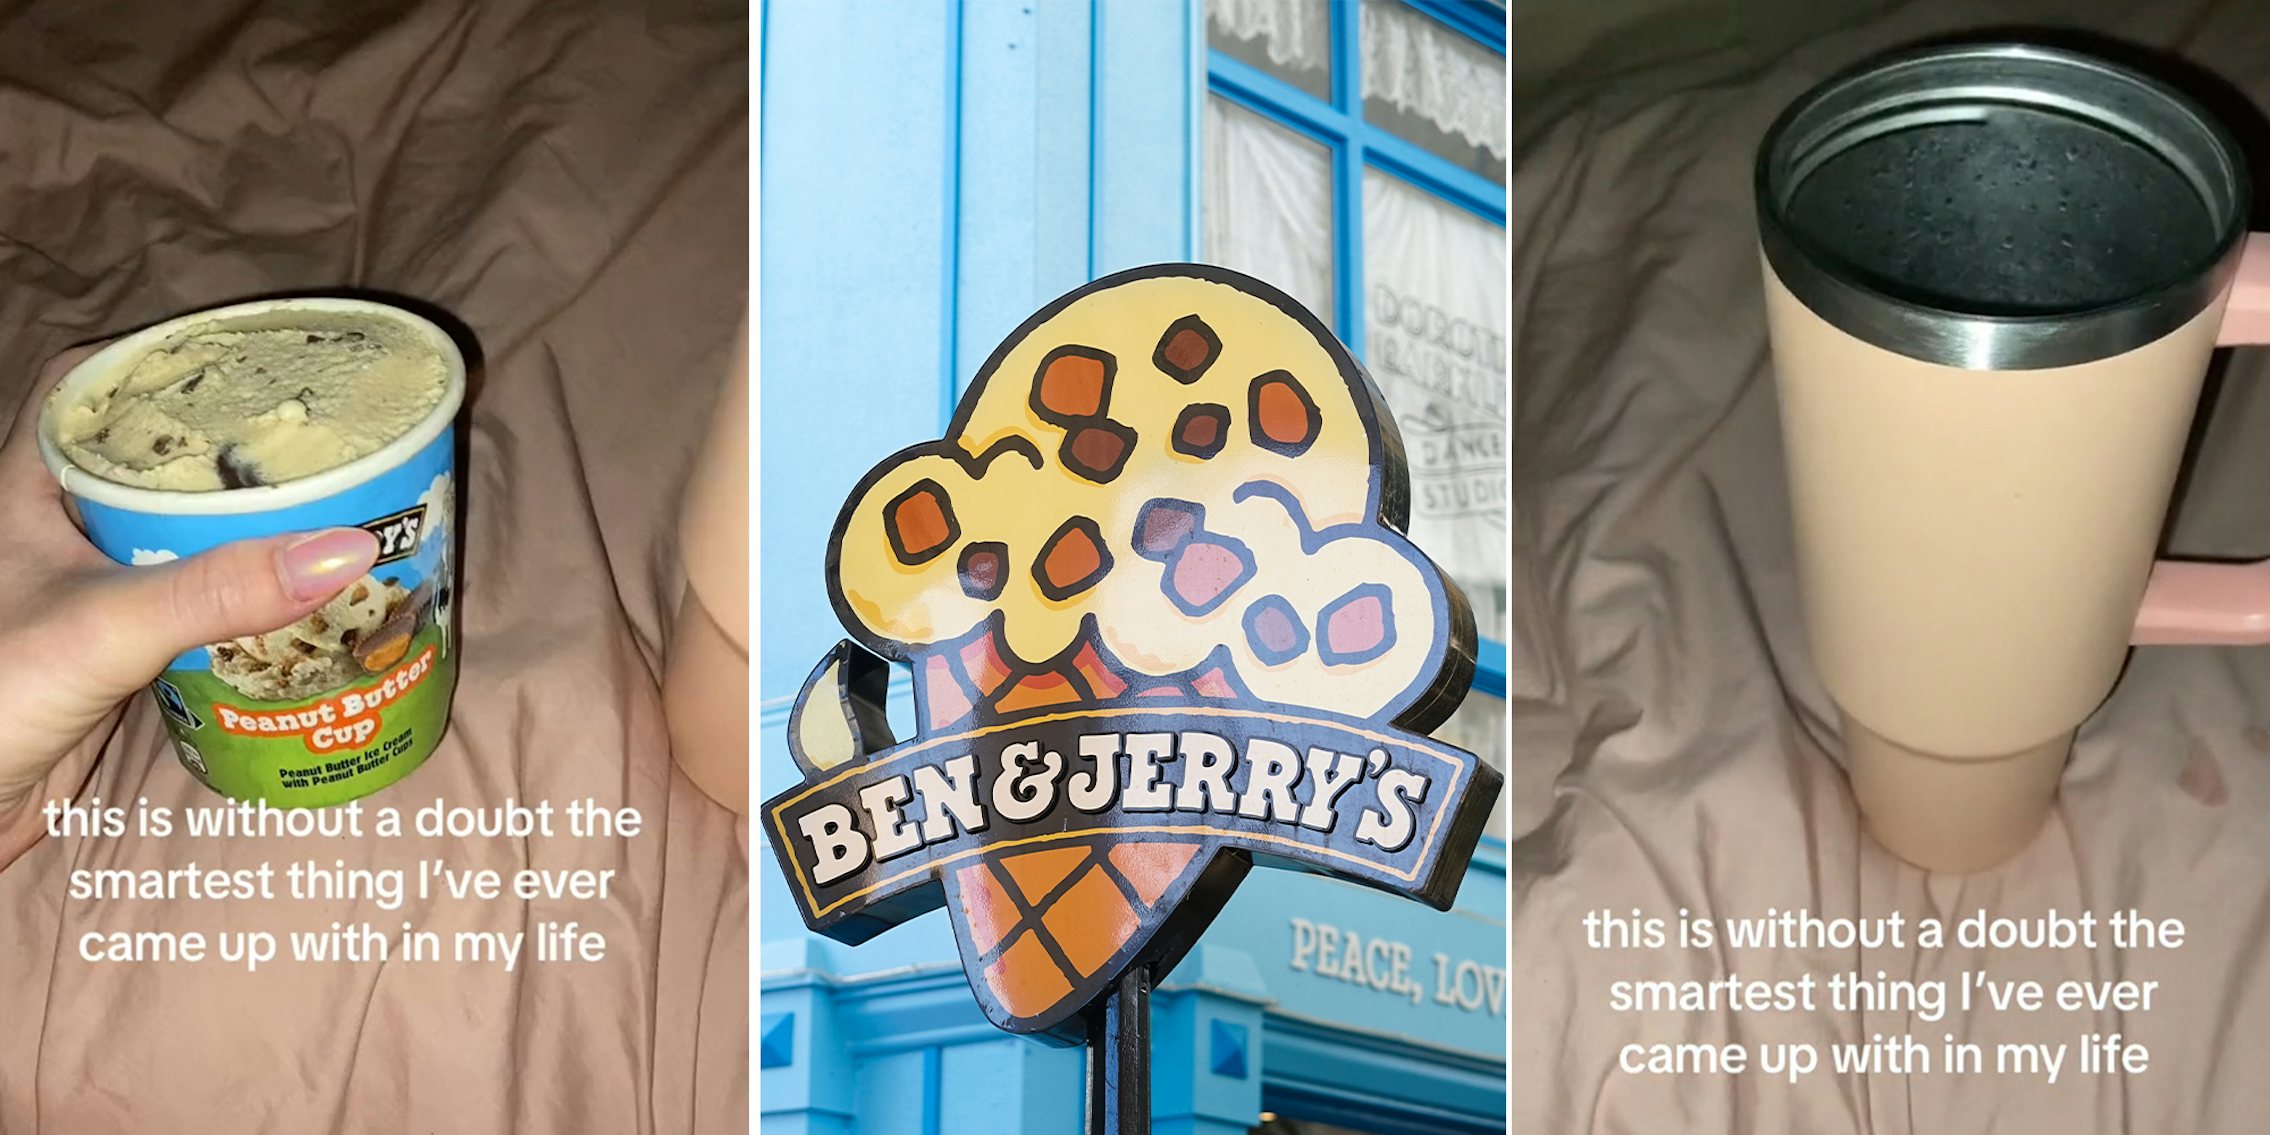 Woman shares Stanley Cup hack for Ben and Jerry's ice cream